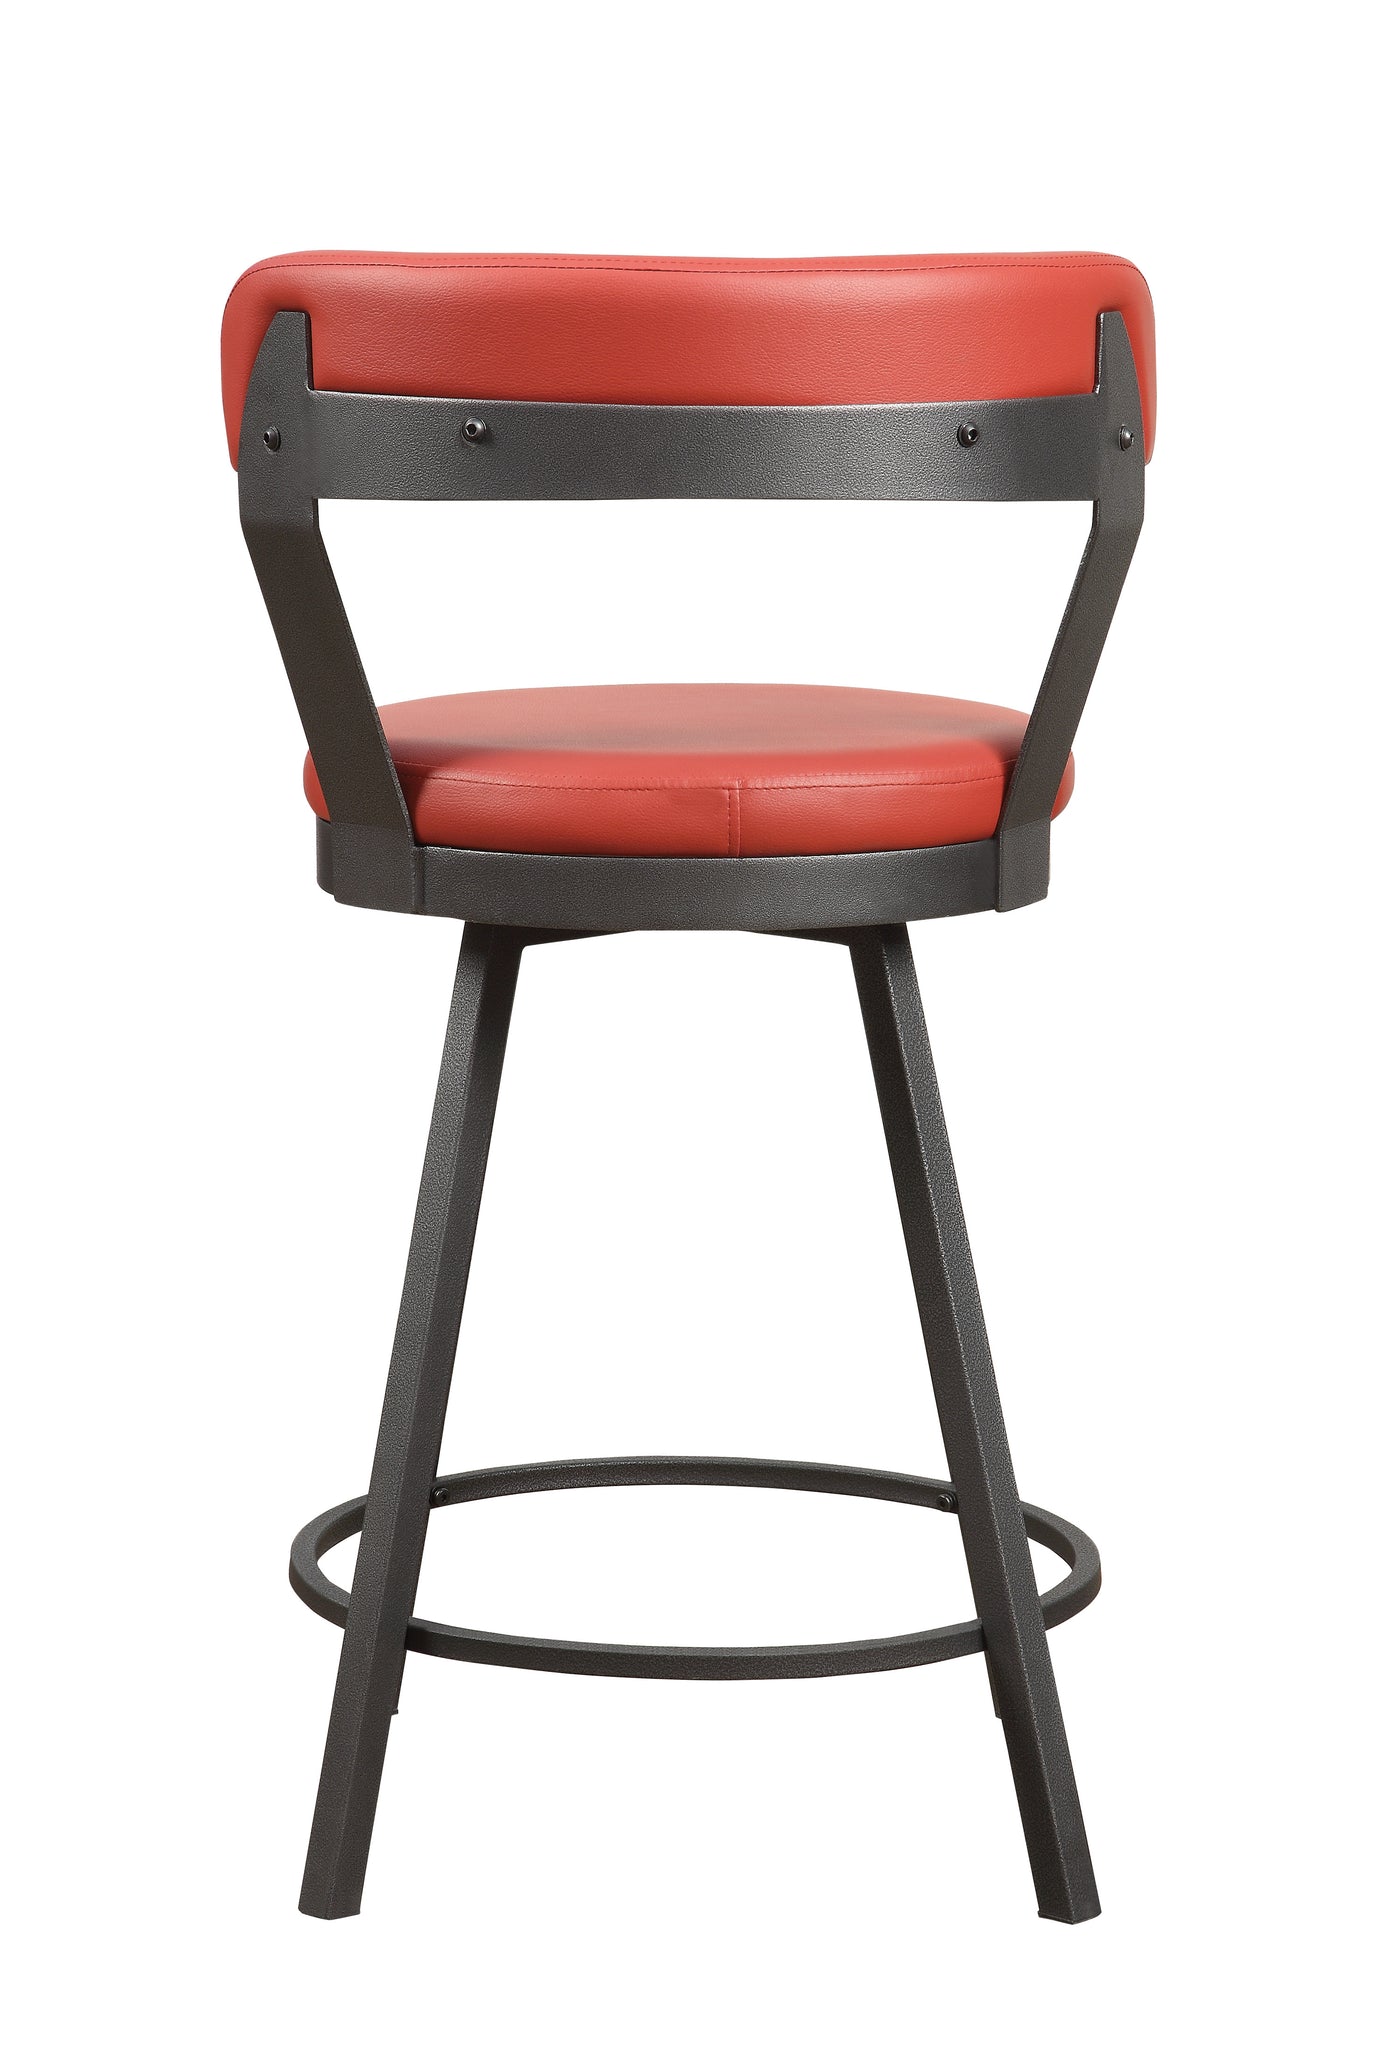 Drai Counter Height Stool - Red